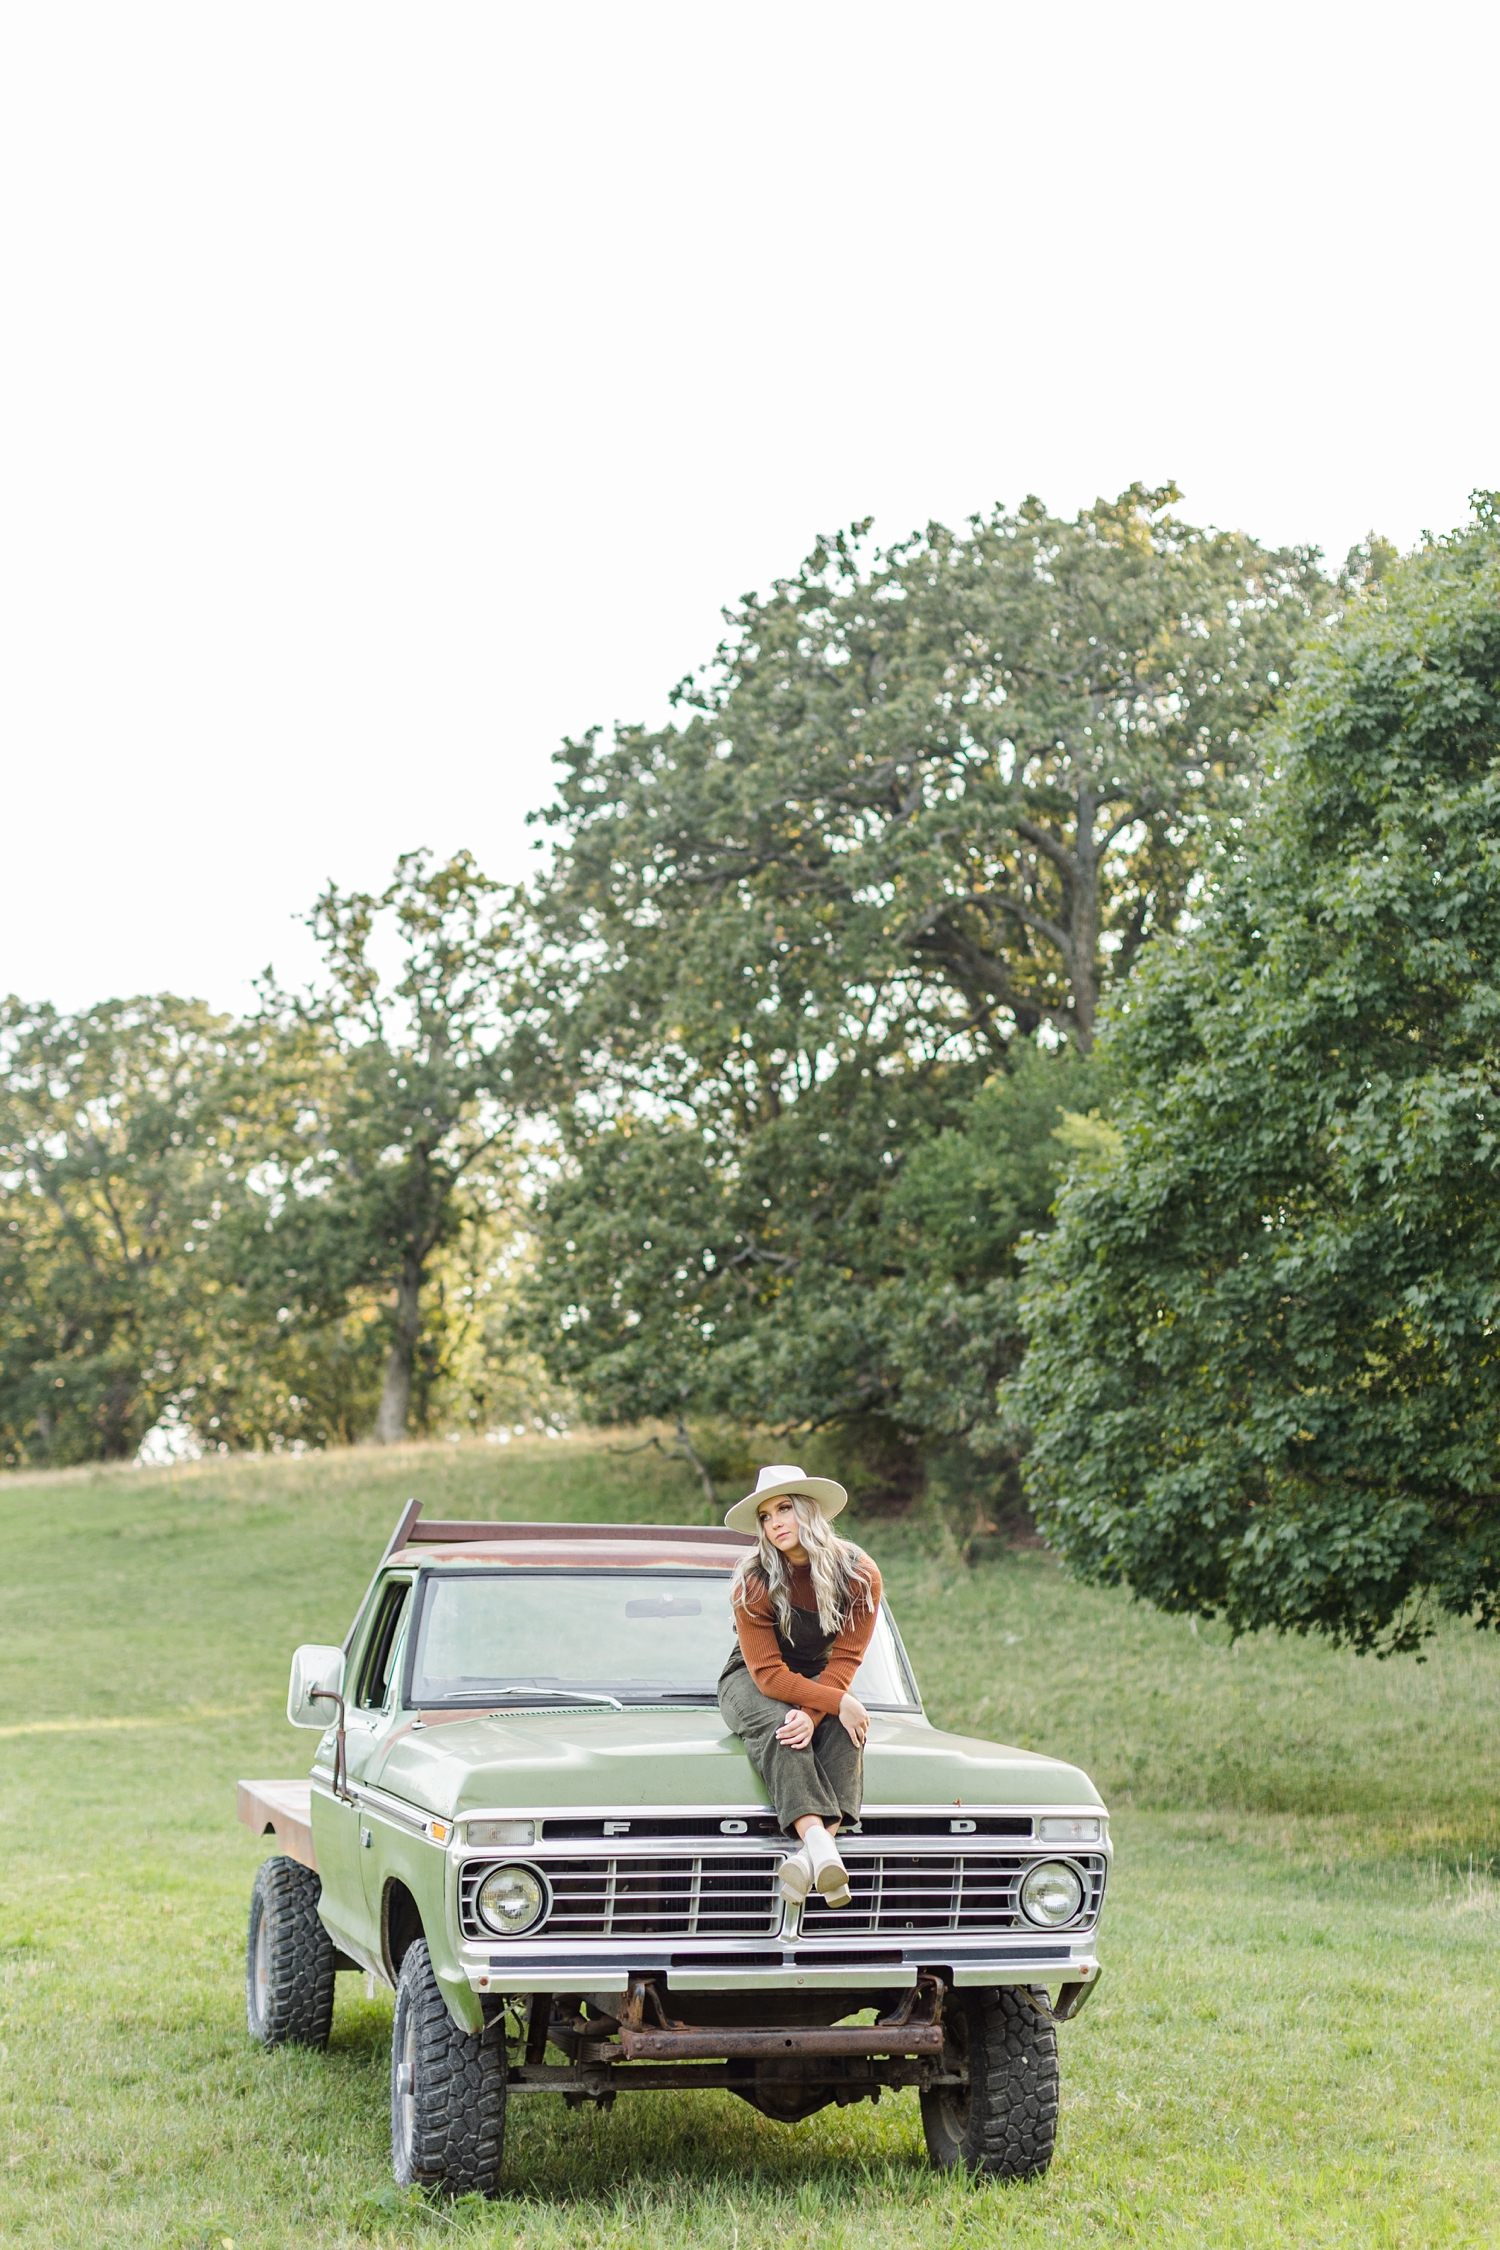 While looking off into the distance, Shelby sits on the hood of a green 72 Ford truck in the middle of a grassy pasture | CB Studio